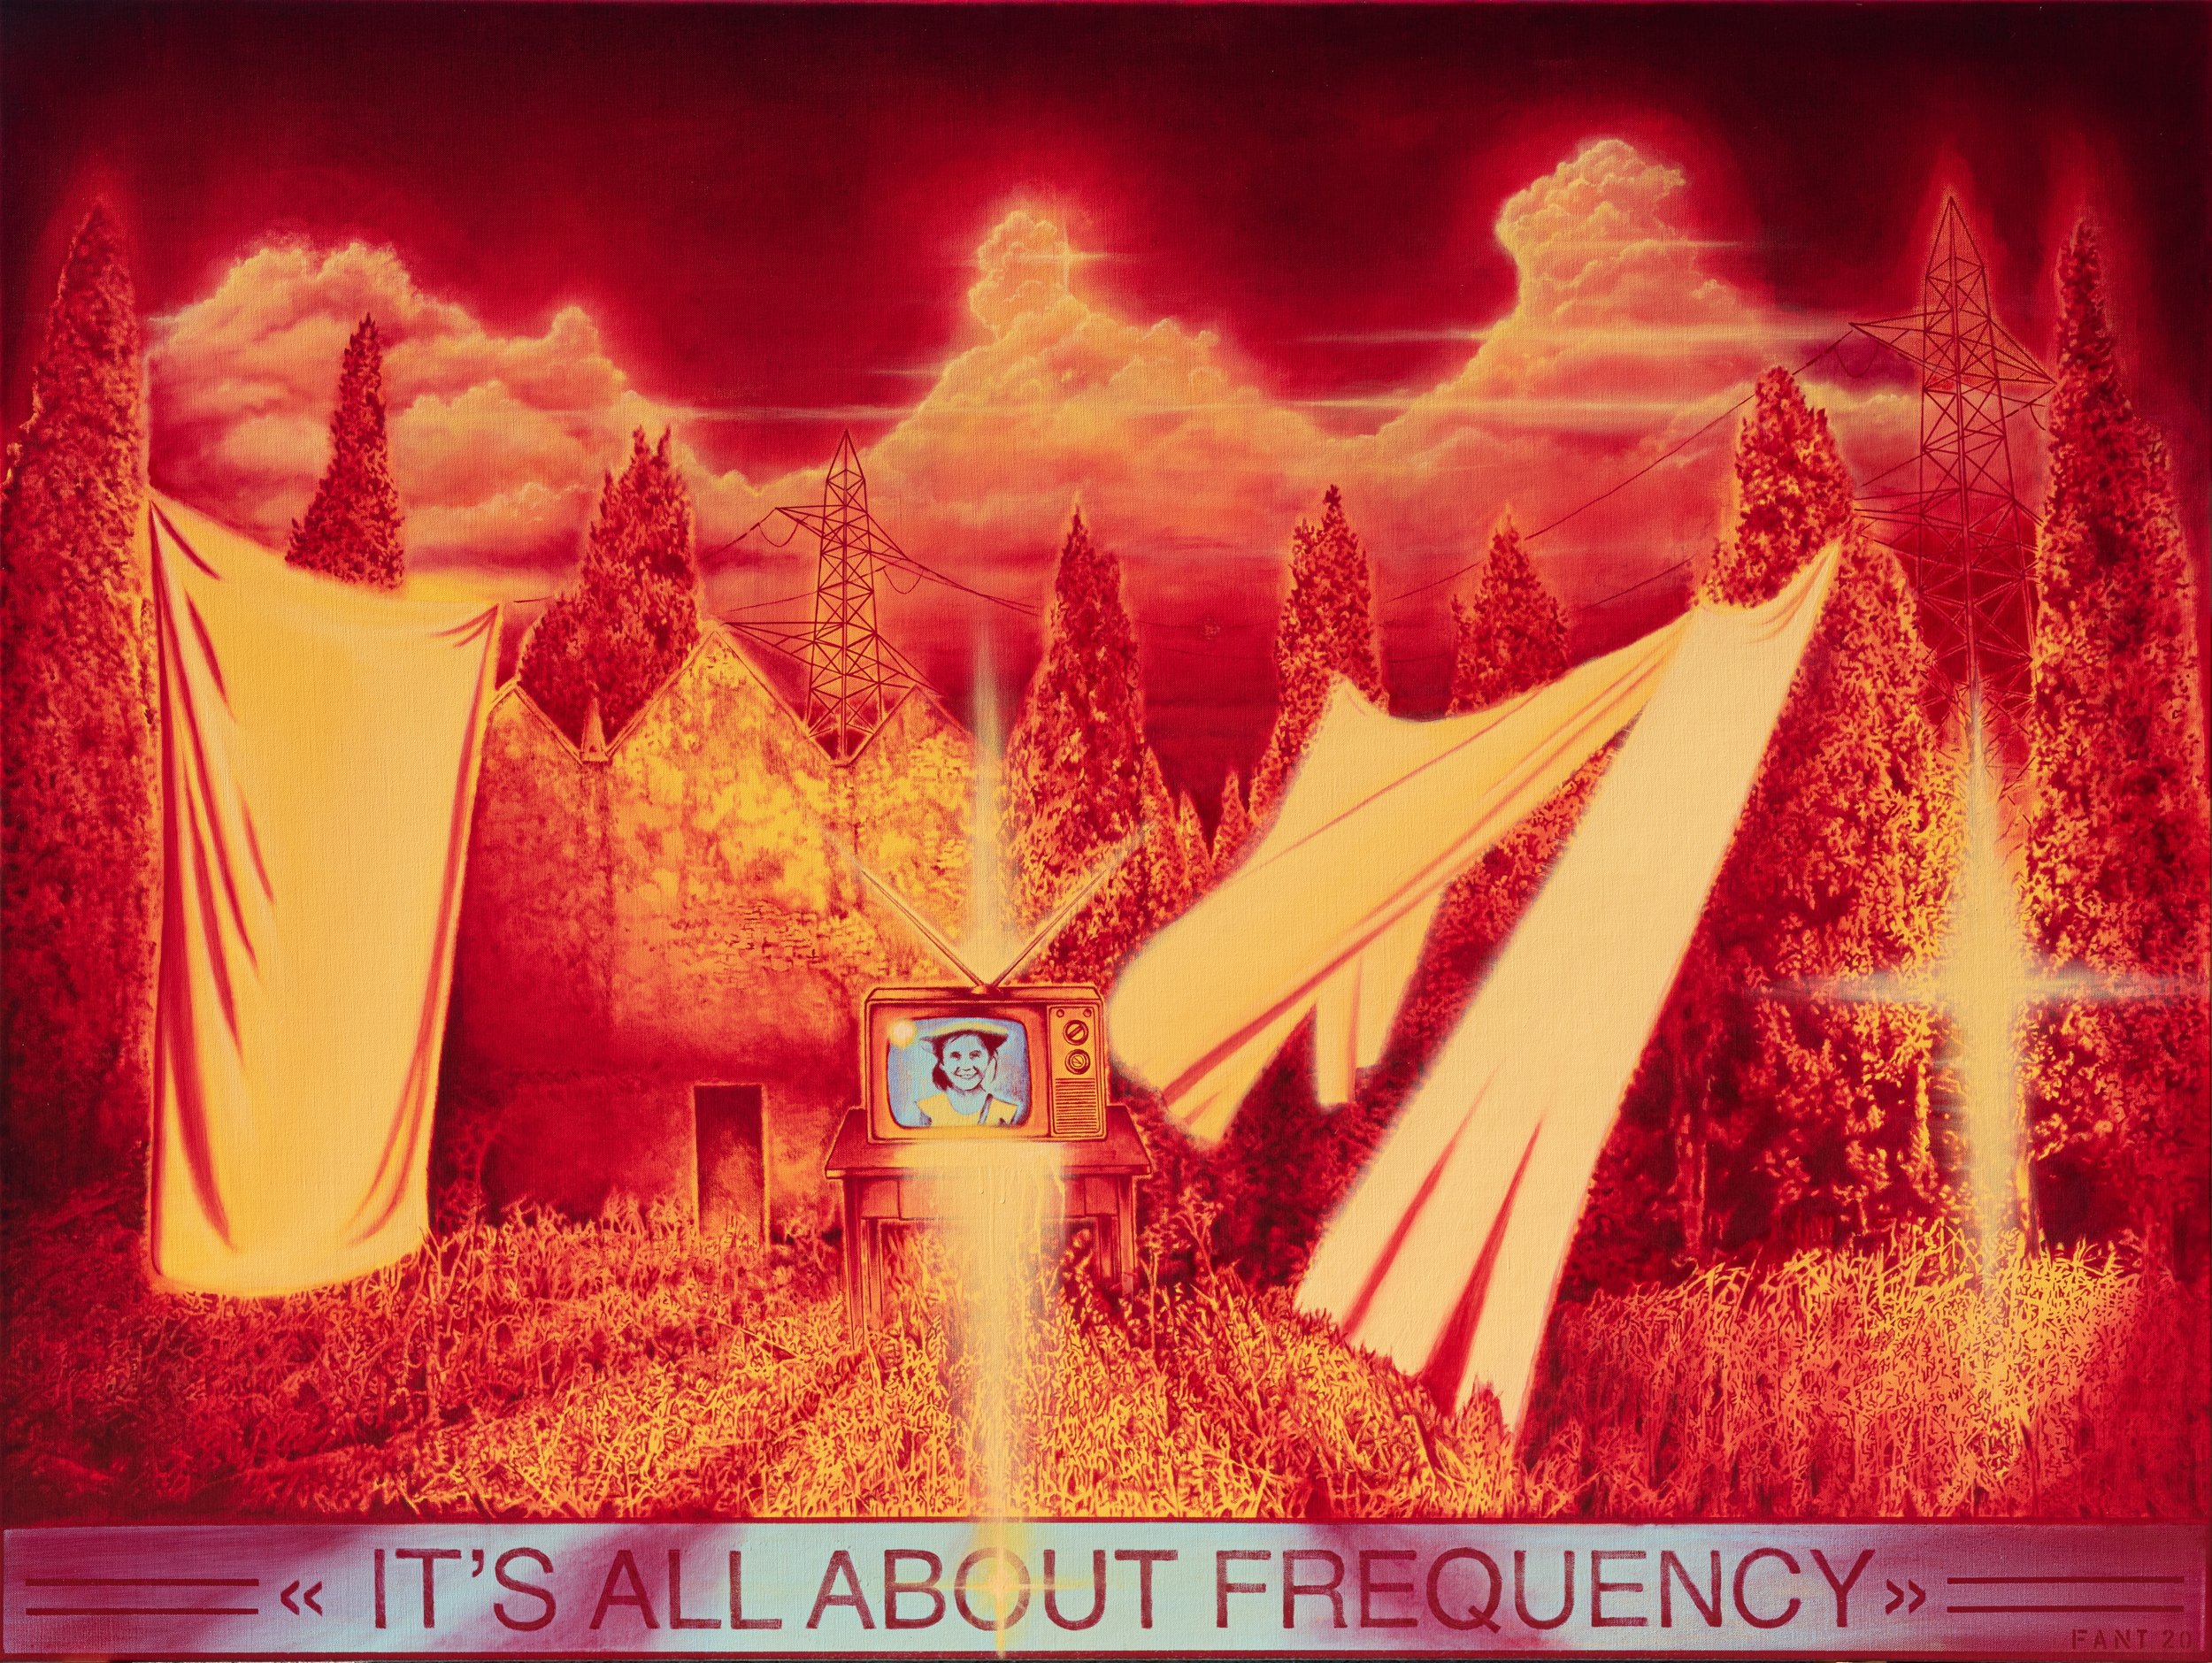 2021-Fant-01.tif its all about frequency.jpg